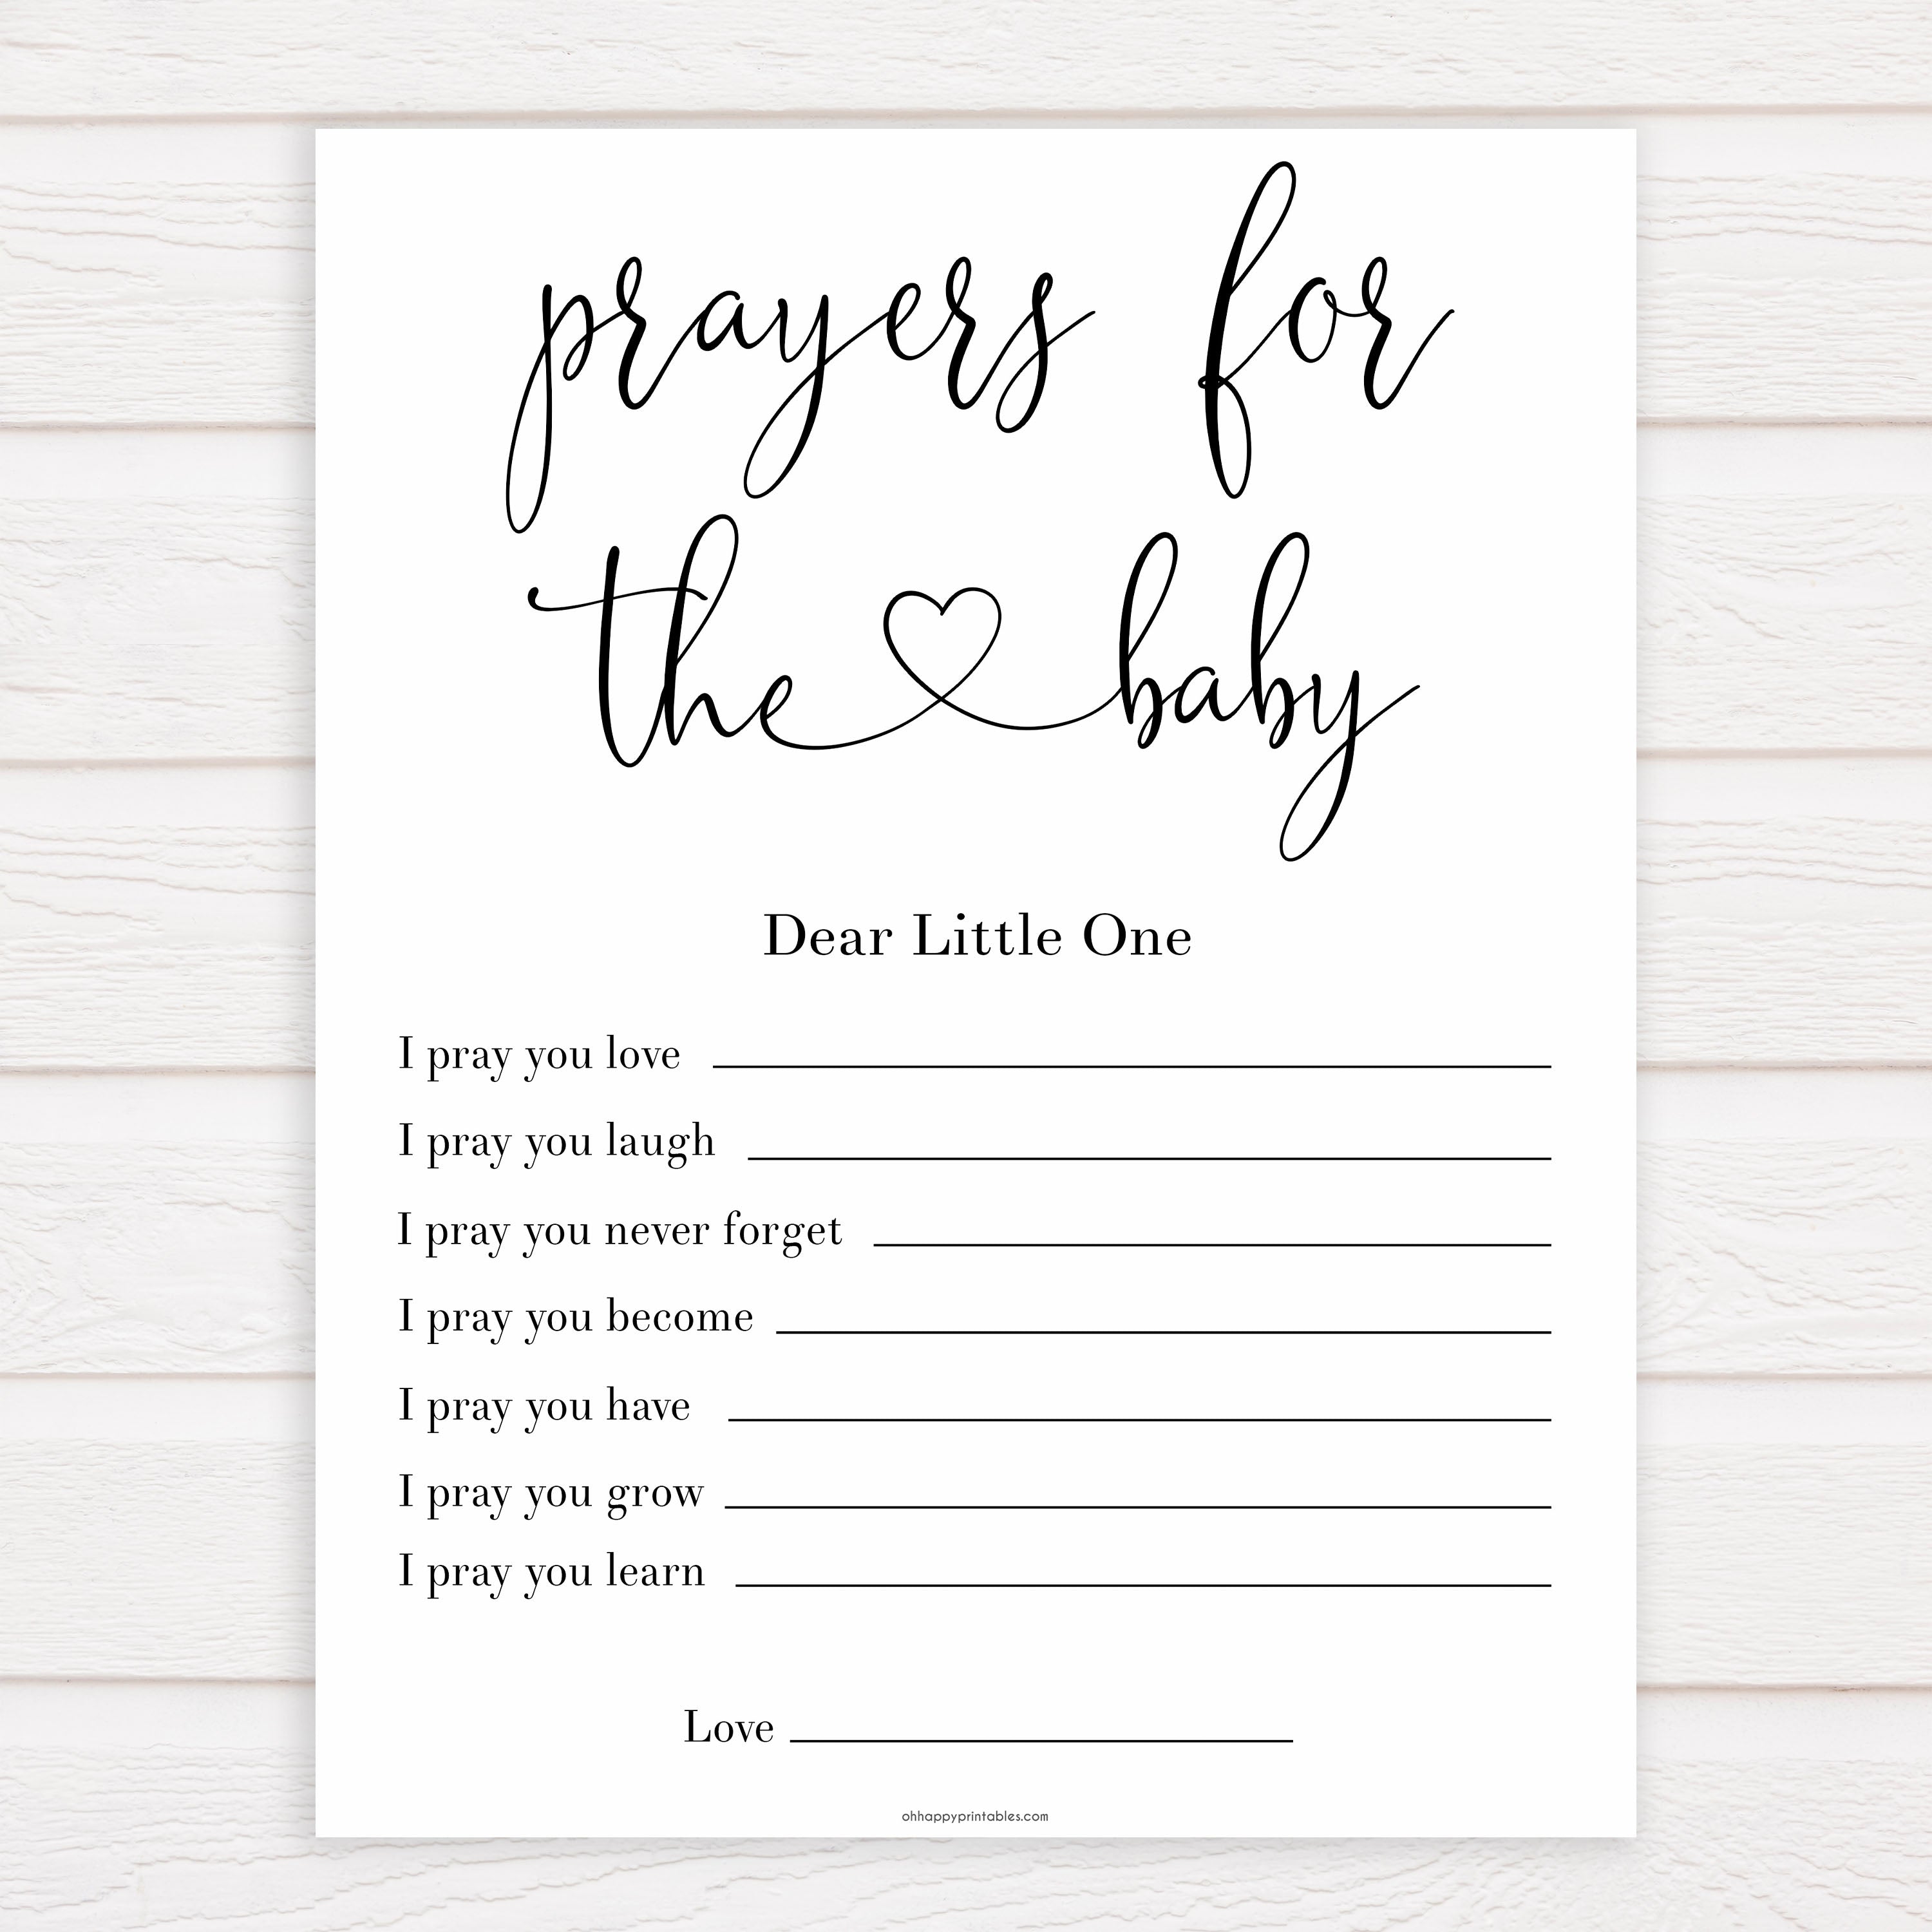 Minimalist baby shower games, prayers for the baby baby games, 10 baby game bundles, fun baby games, printable baby games, top baby games, popular baby games, labor or porn games, neutral baby games, gender reveal games